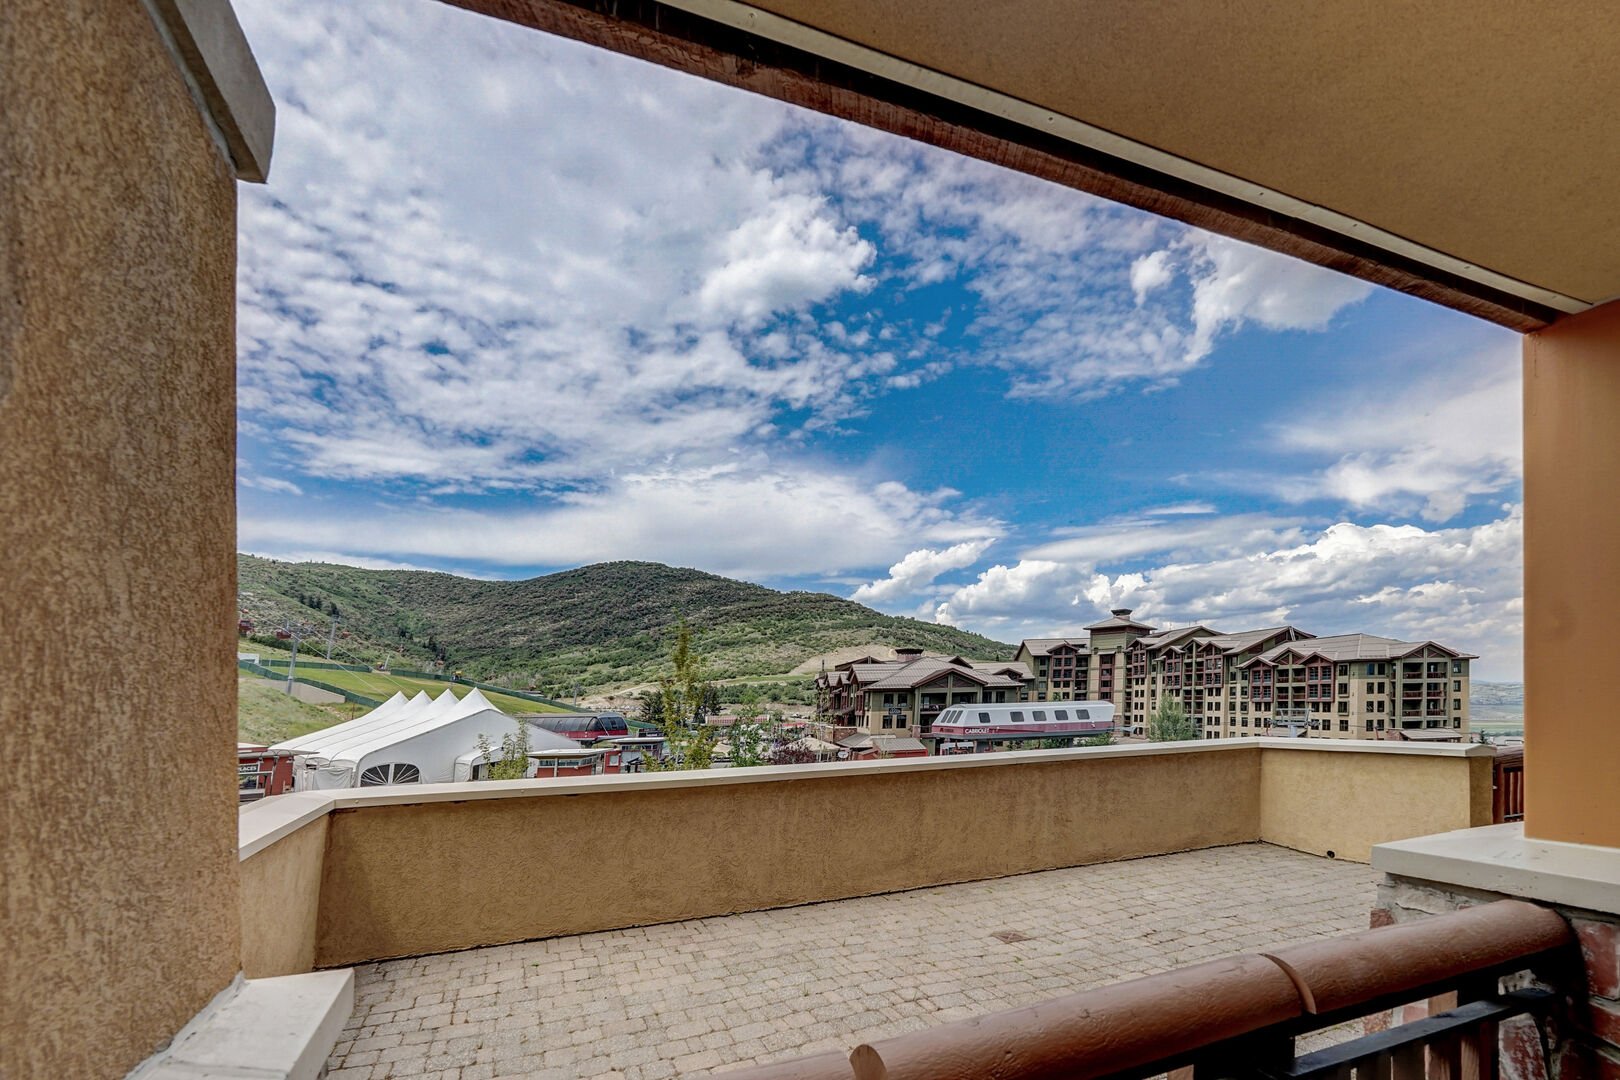 Balcony view of Canyons Village and access to veranda.